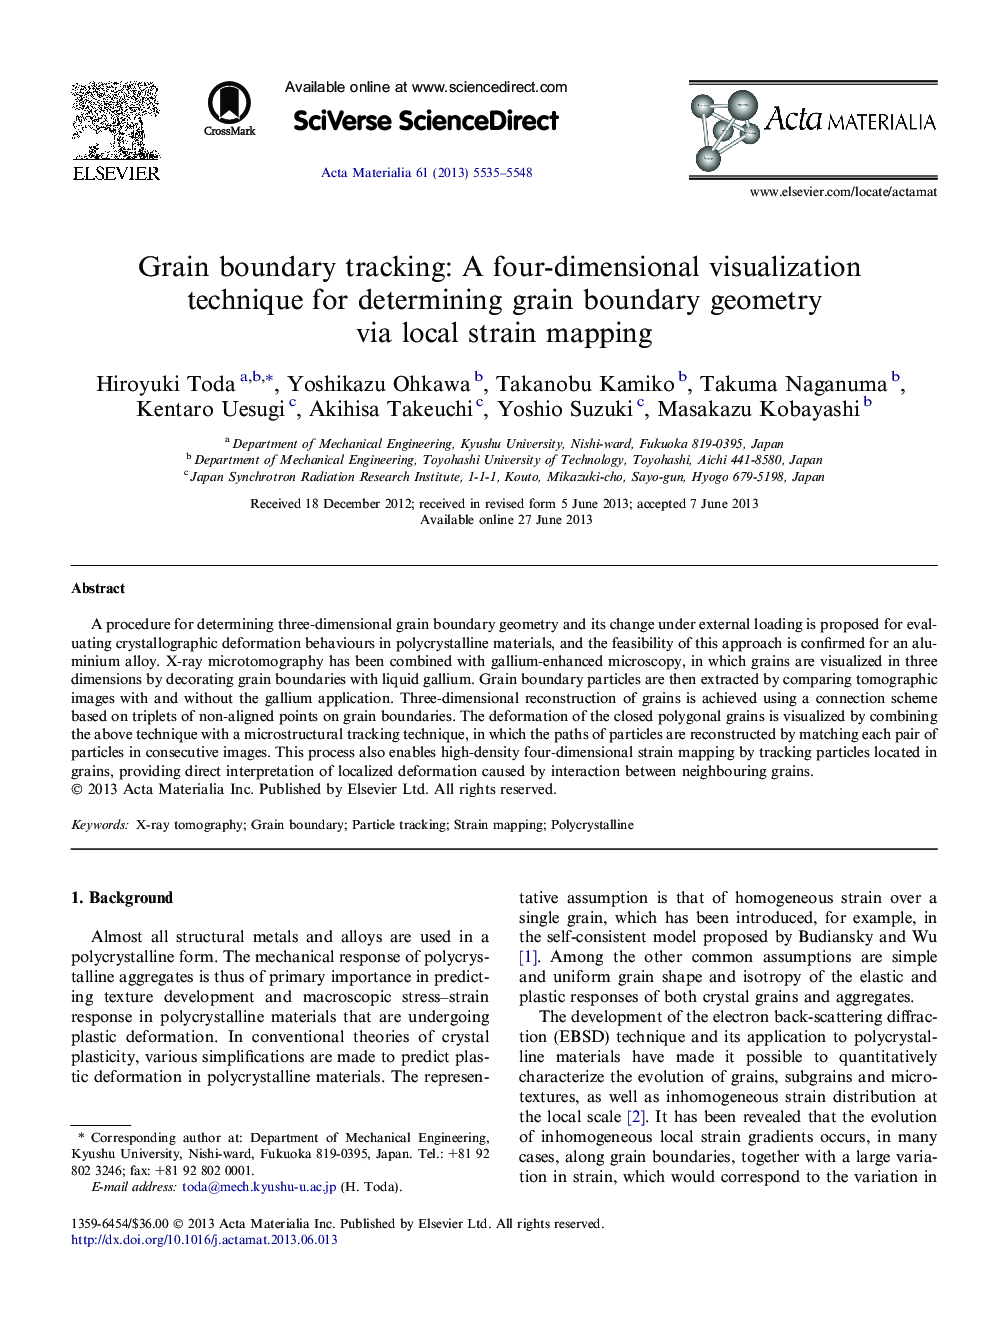 Grain boundary tracking: A four-dimensional visualization technique for determining grain boundary geometry via local strain mapping